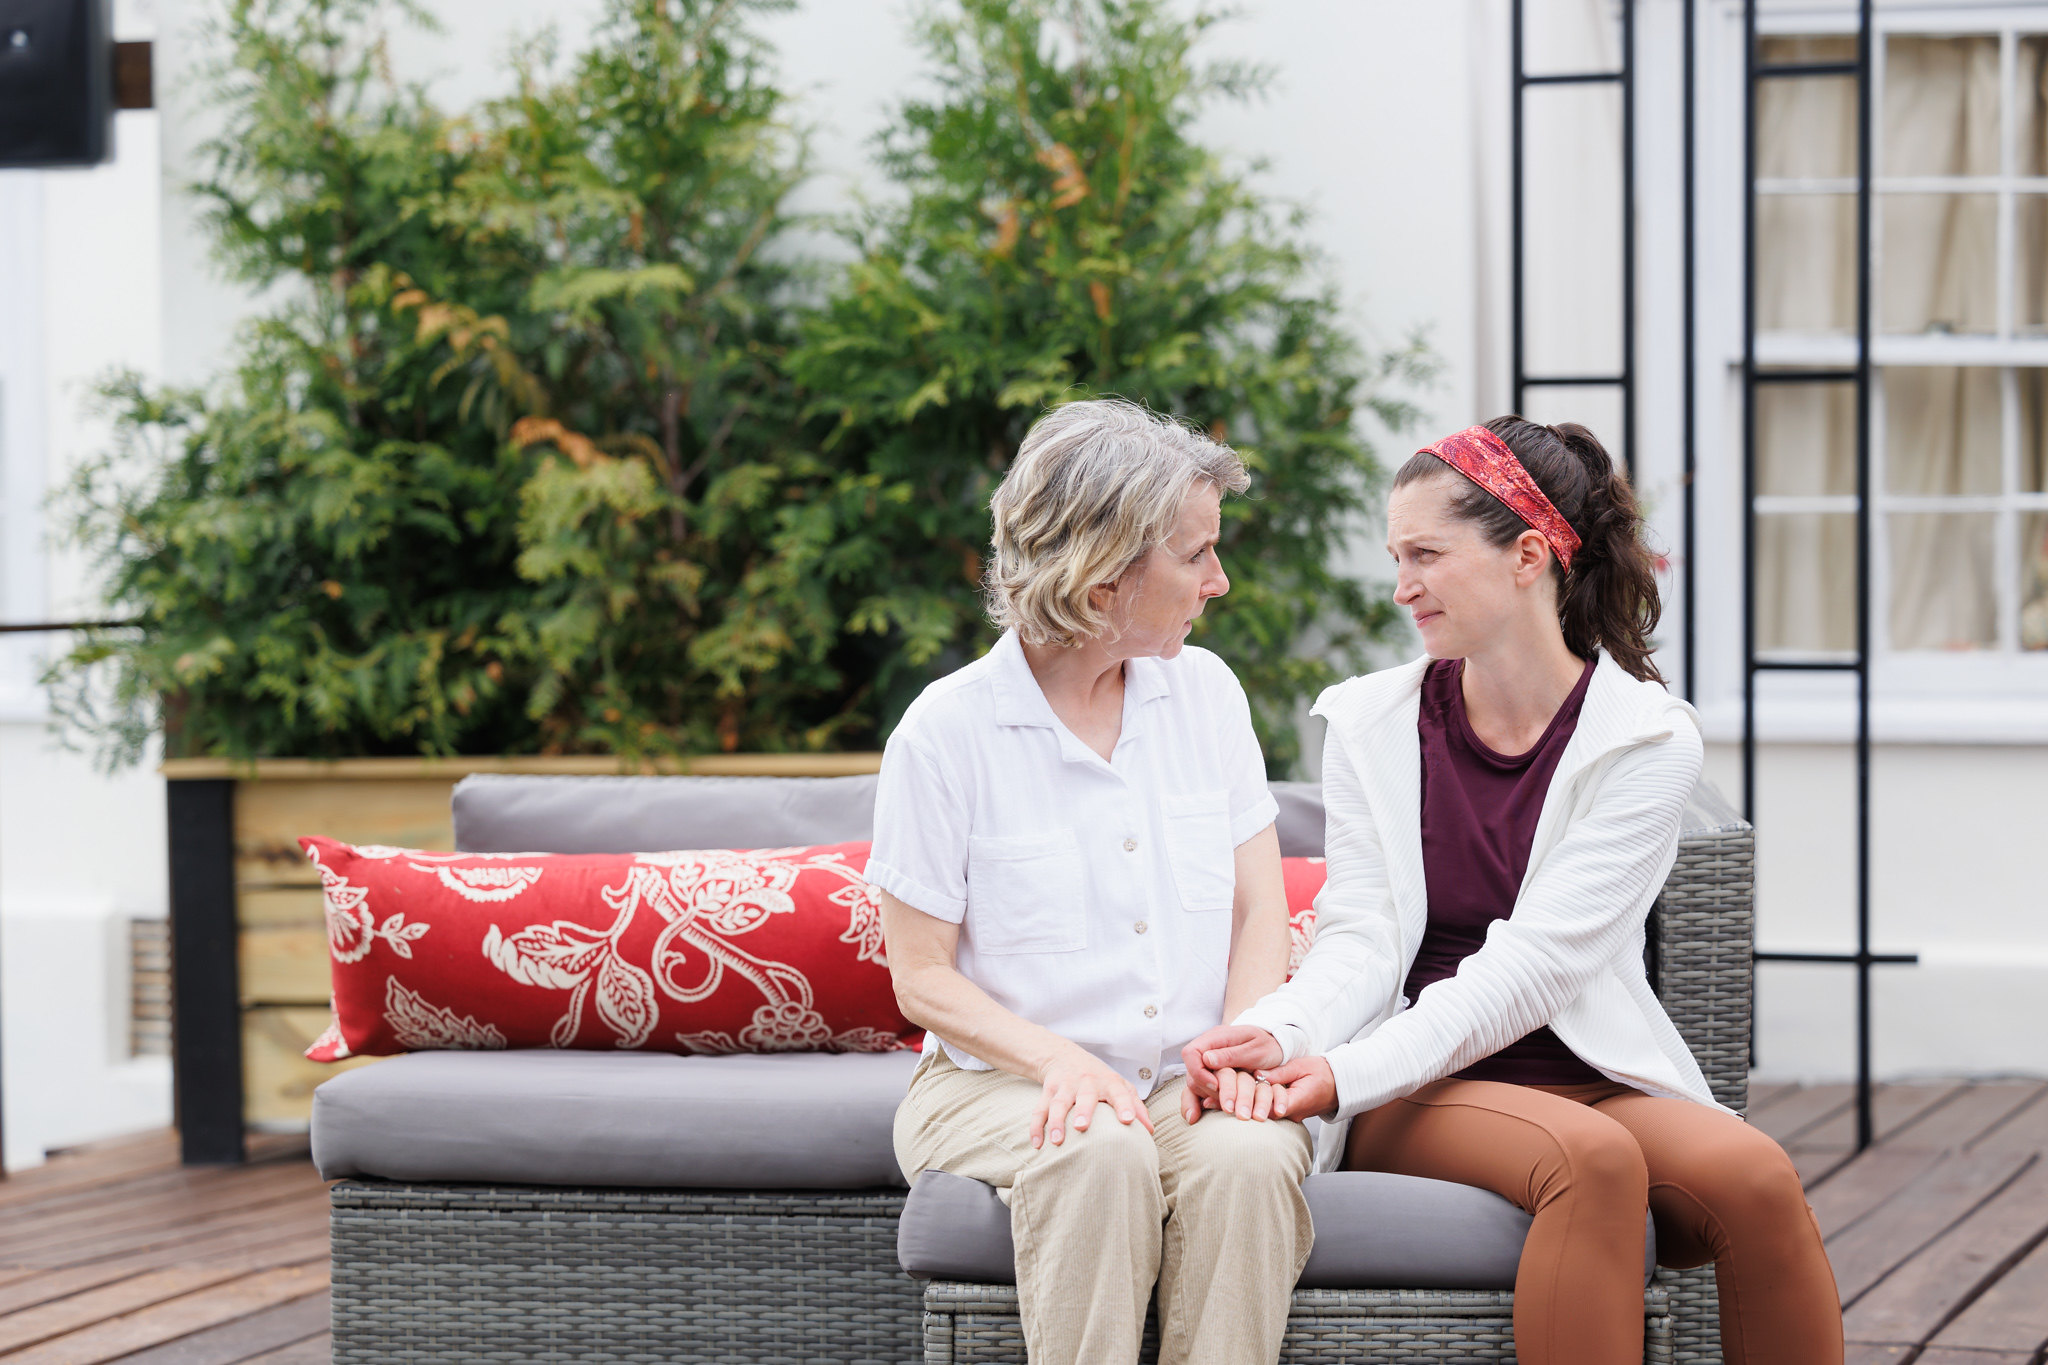 Bella Merlin, portraying Avis, and Caroline Calkins, portraying Wren in "A Body of Water," sit close together on a wicker couch with red floral cushions. Merlin, dressed in a white shirt and beige pants, looks intently at Calkins, who is wearing a maroon top, light brown leggings, and a white jacket. They hold hands and share a tender, emotional moment. The background includes green foliage and part of the house, enhancing the intimate and heartfelt atmosphere of the scene.